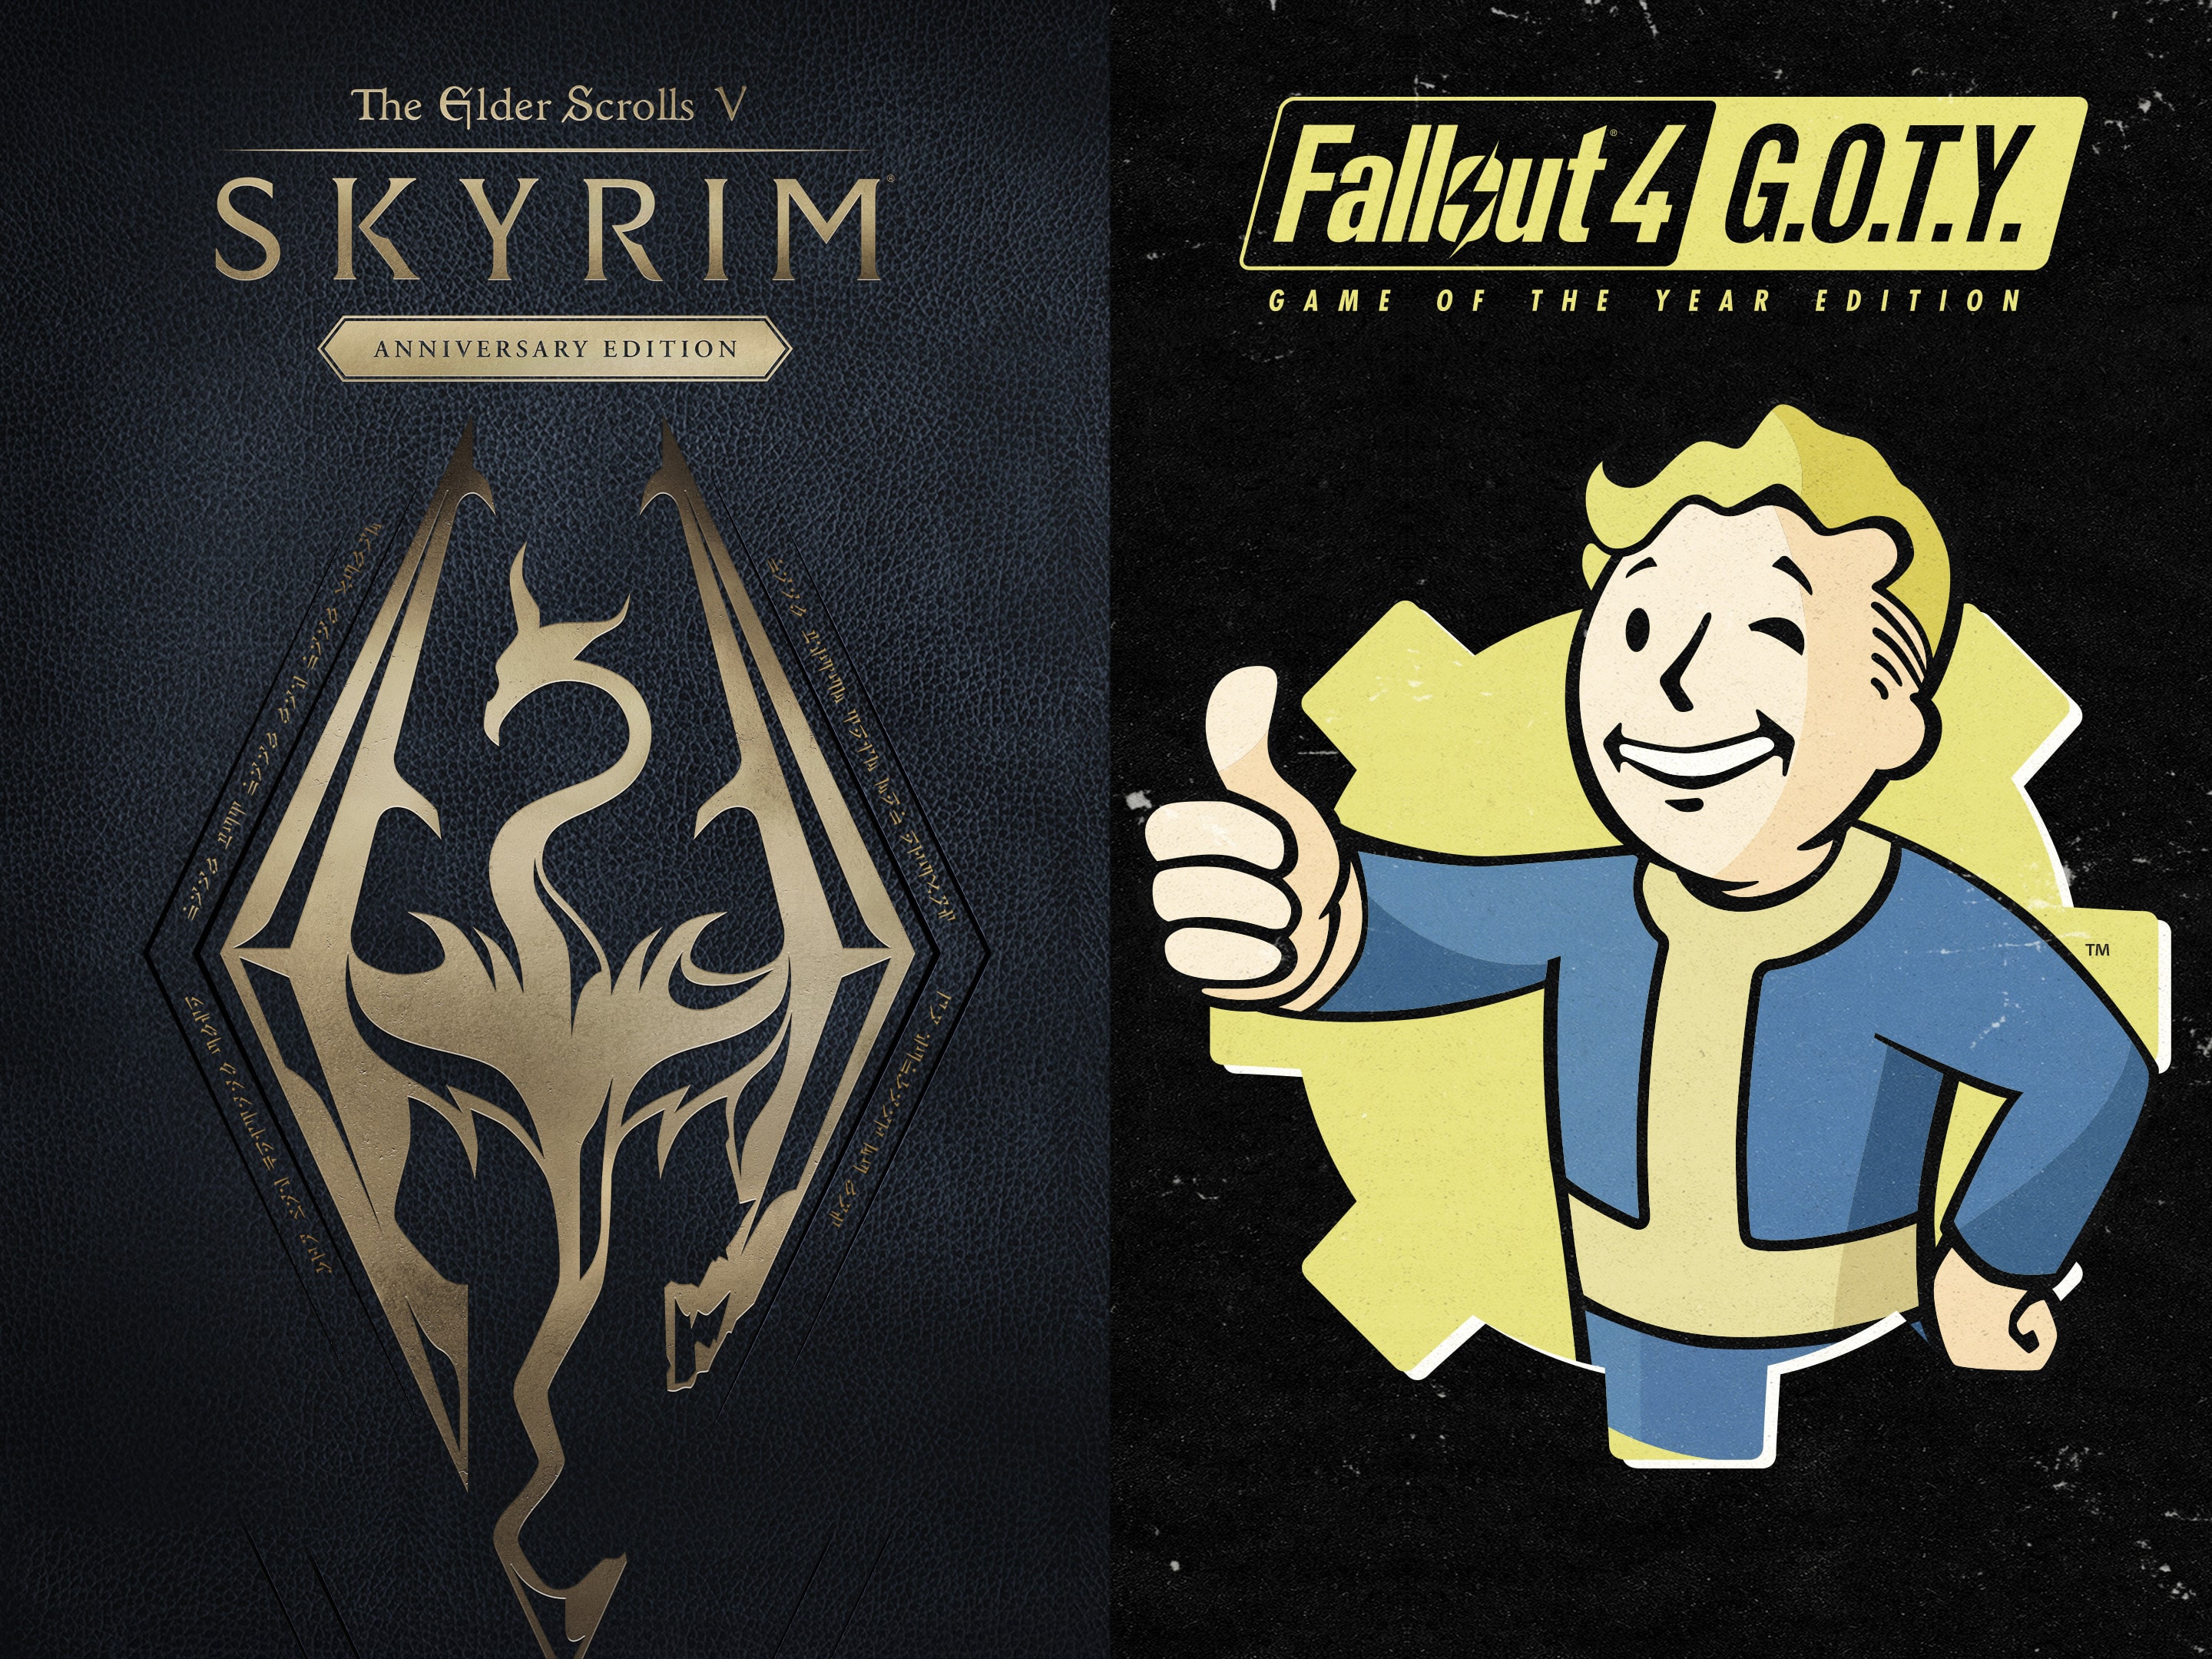 støvle Demon Play livstid Fallout 4: Game of the Year Edition